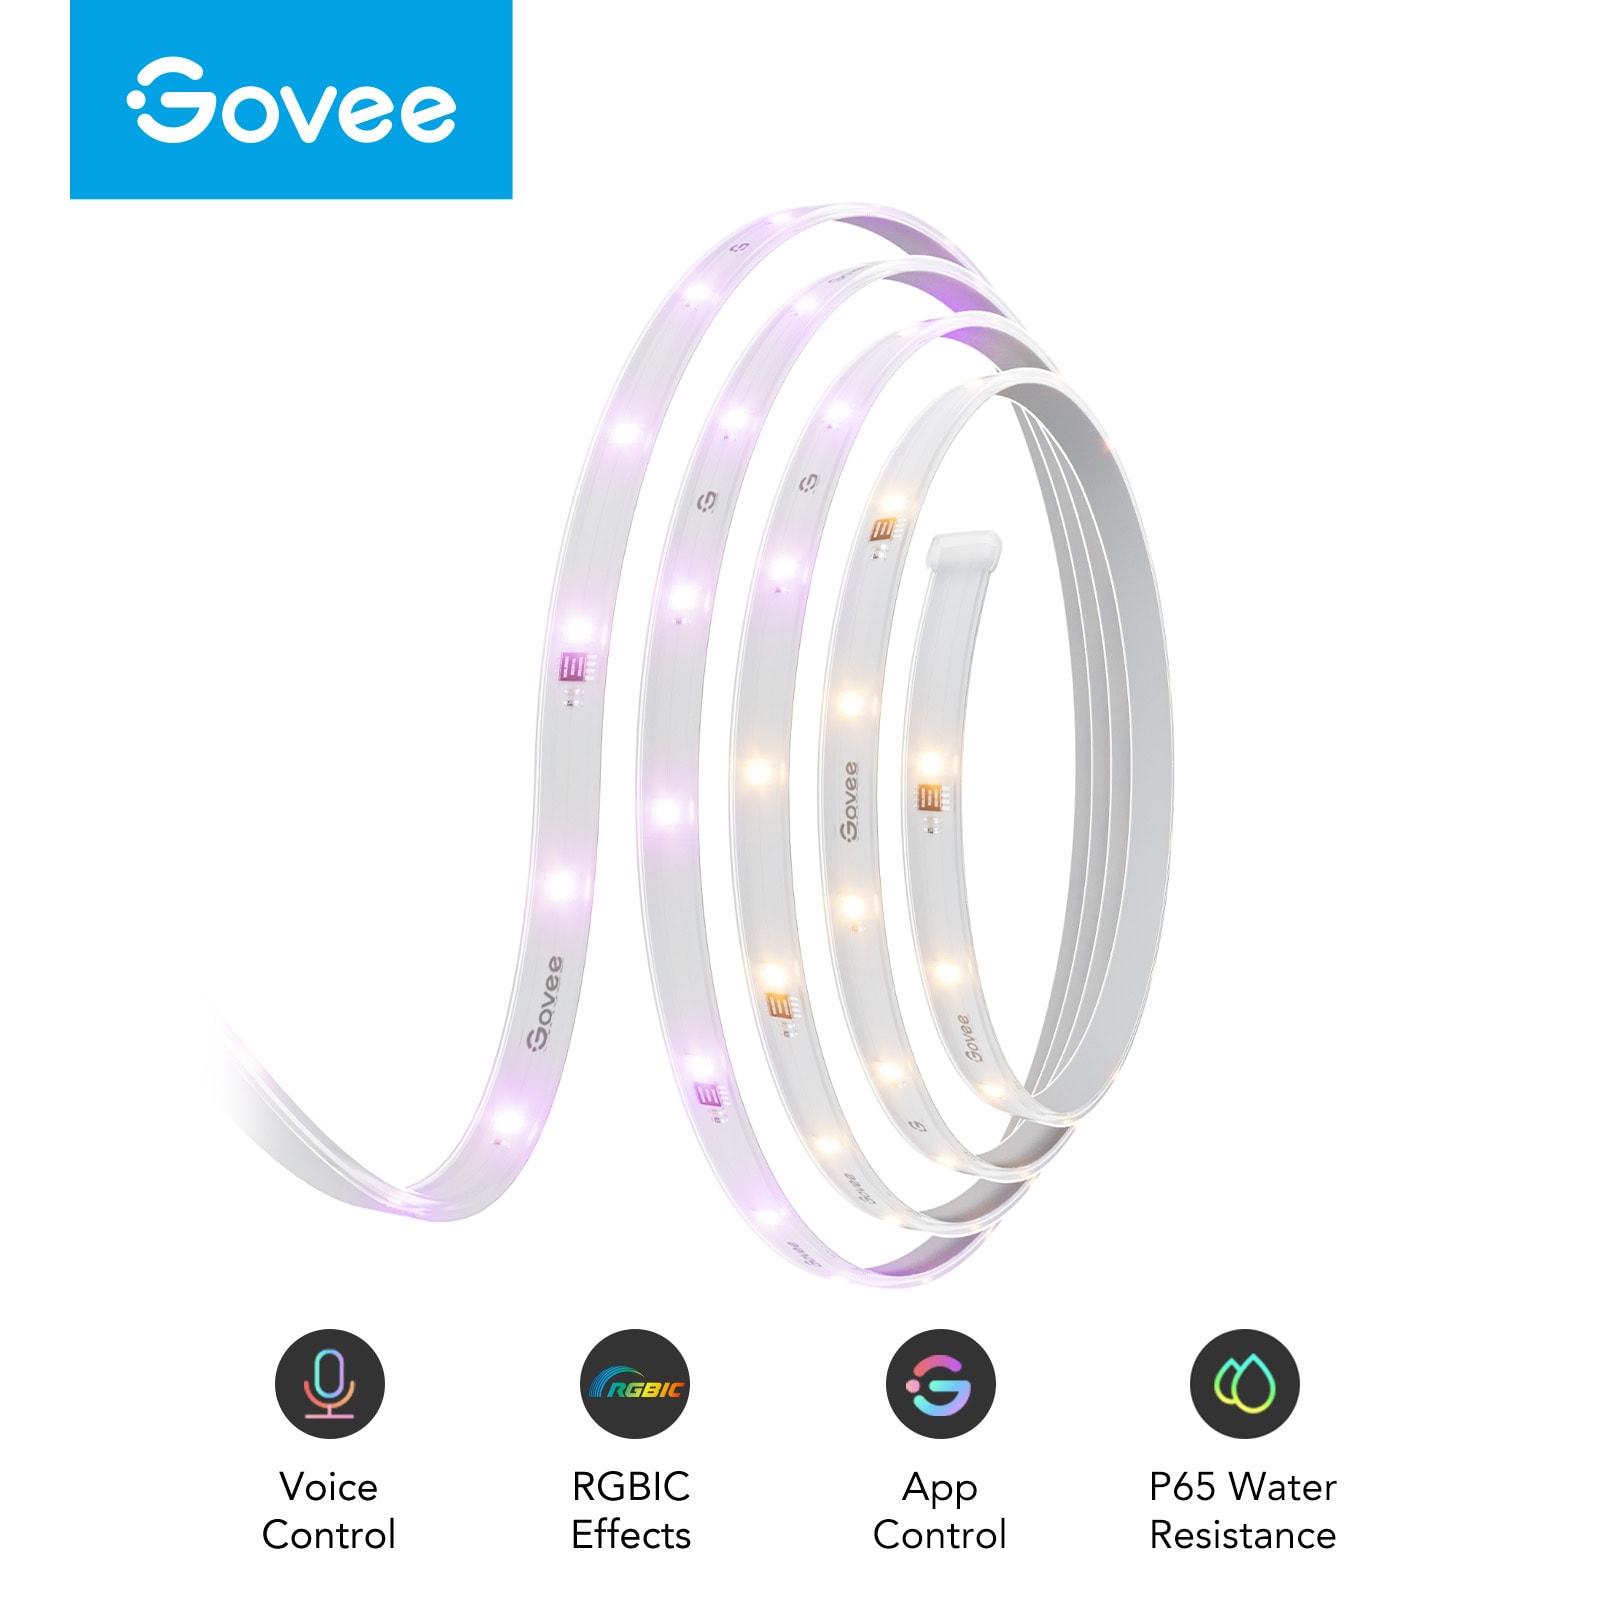 Govee RGBIC Wi-Fi+Bluetooth LED Strip Lights - 32.8-ft - Colour changing  H6172GD1